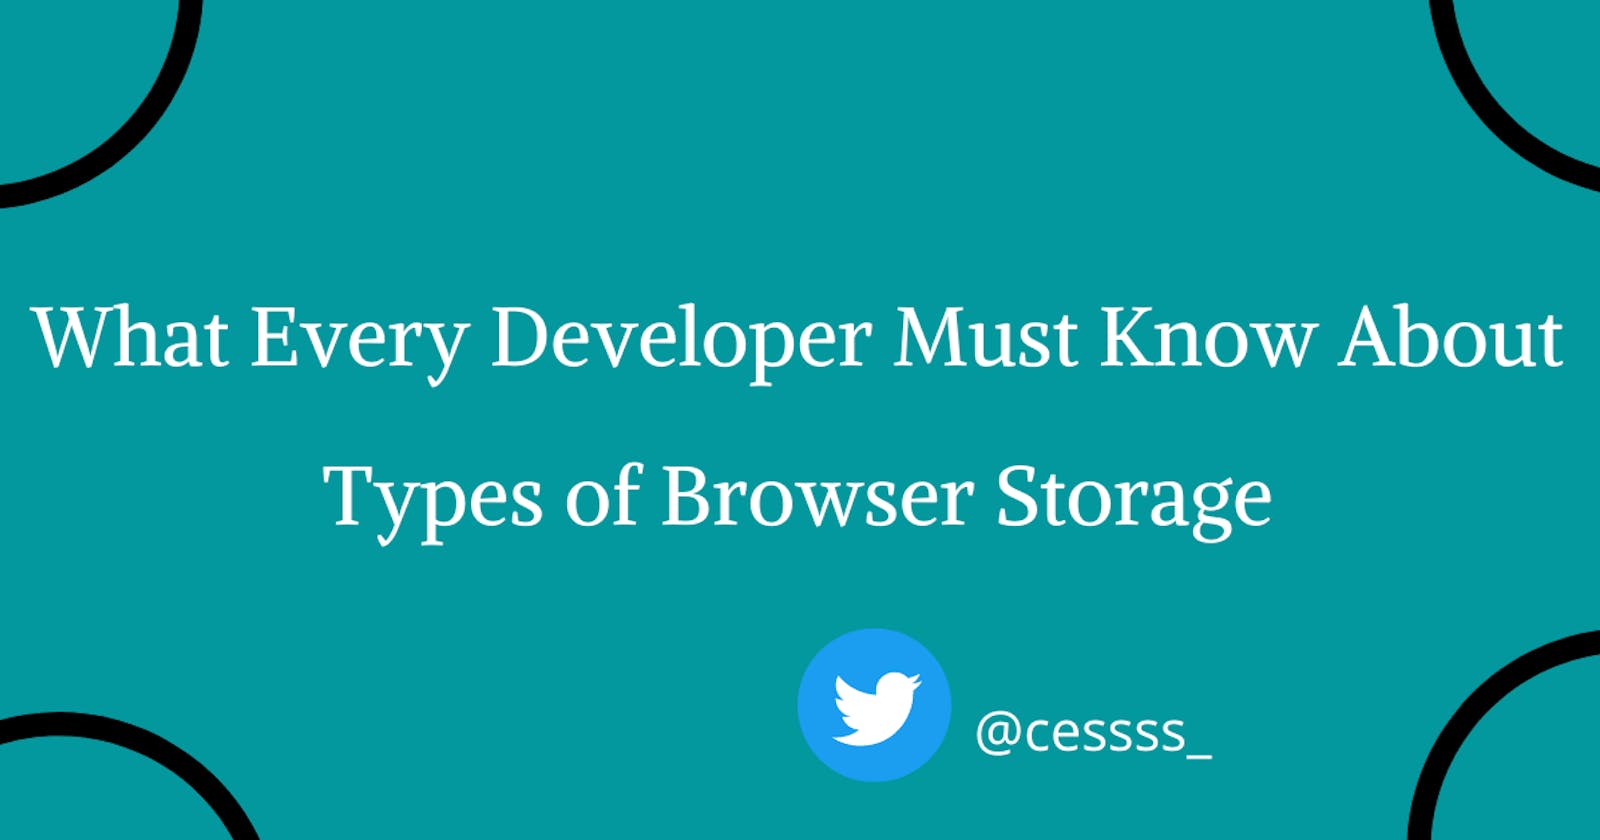 What Every Developer Must Know About Types of Browser Storage